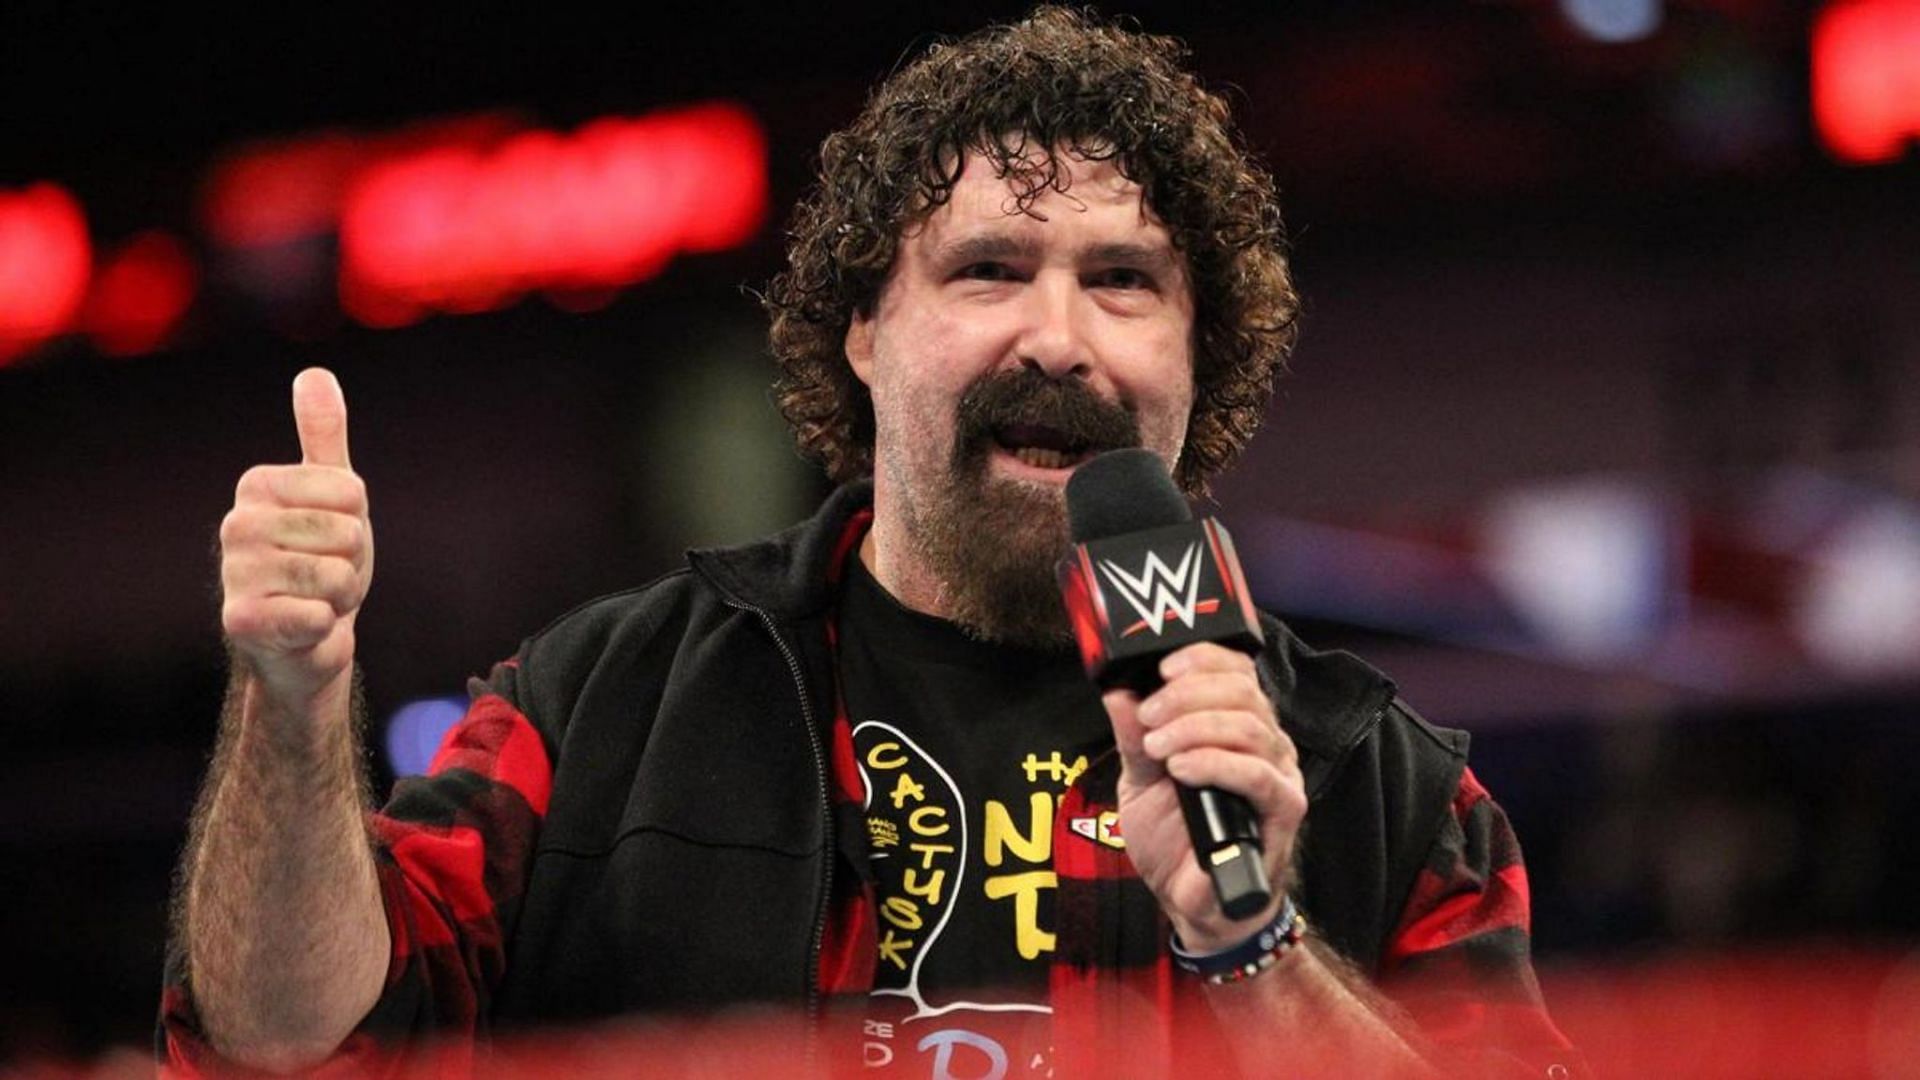 Mick Foley has been away from in-ring action for over a decade now